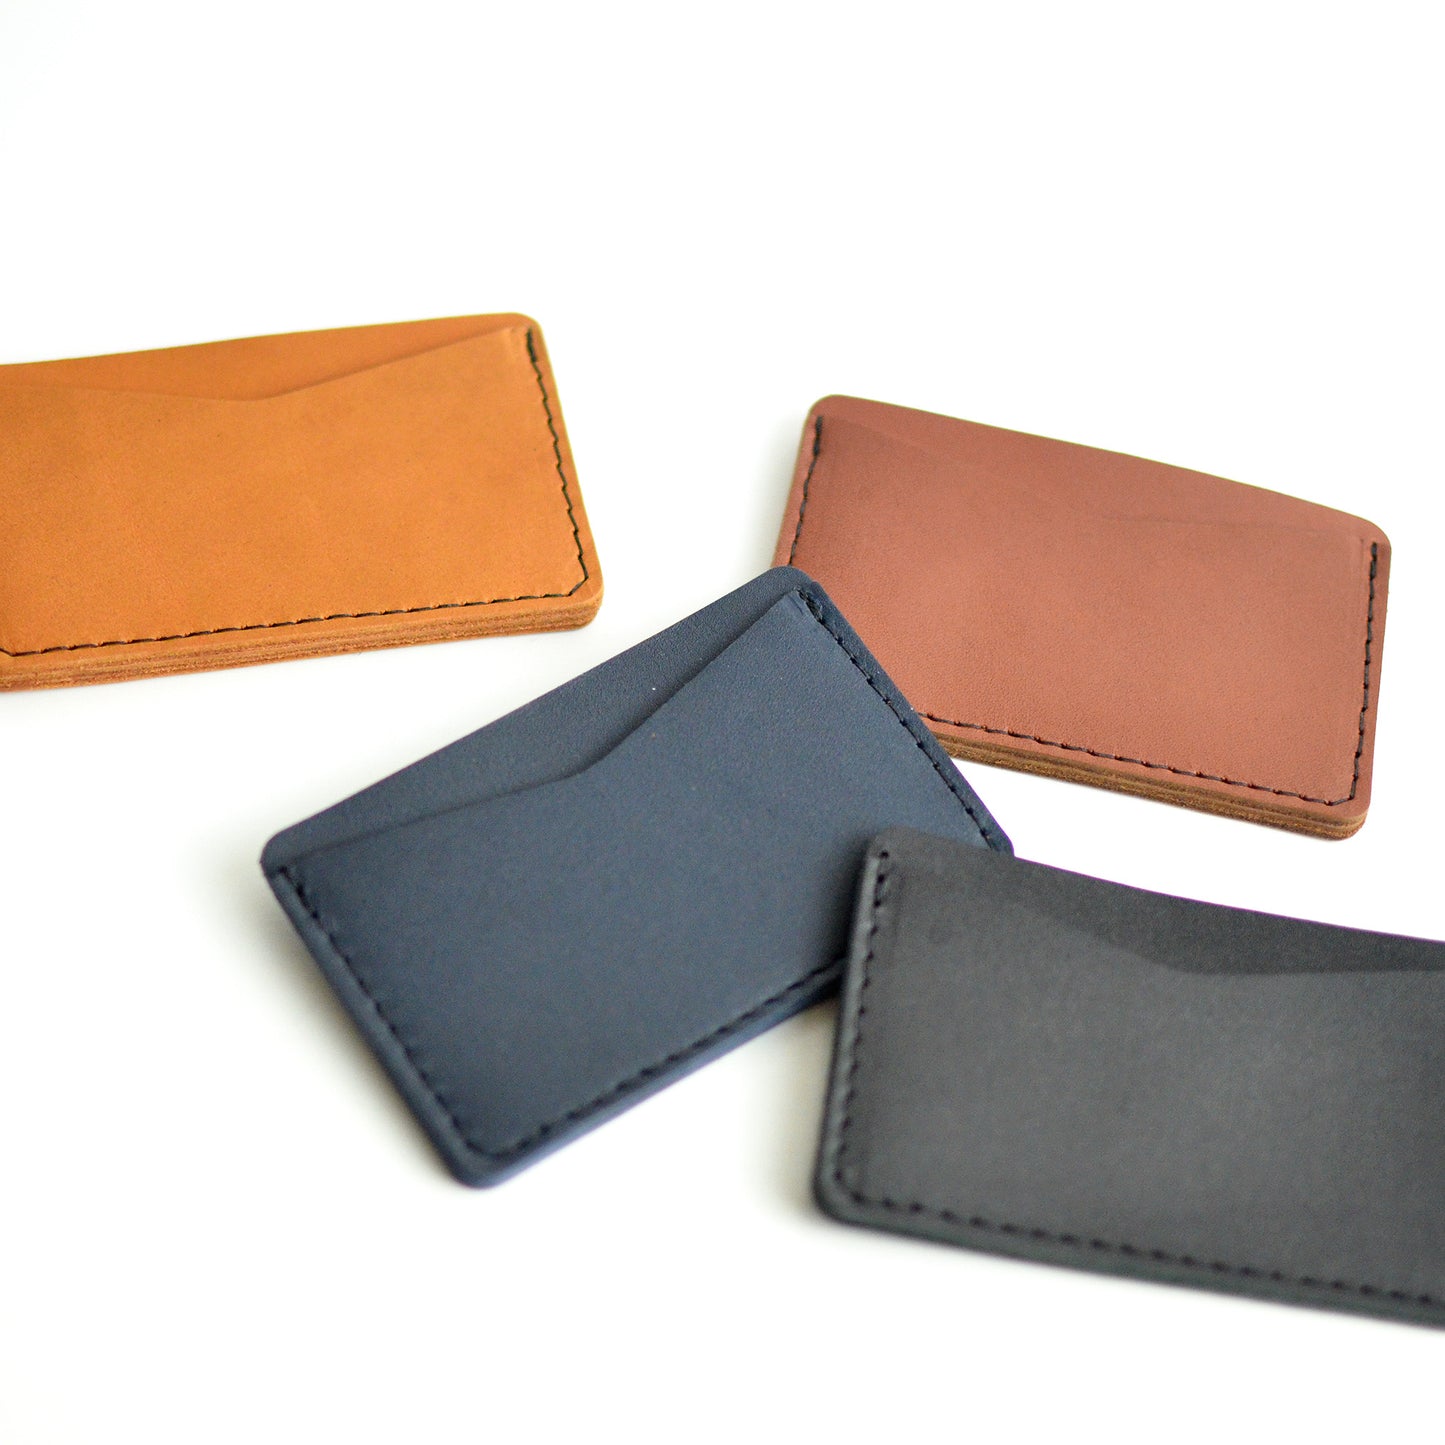 Double Sided Card Holder - Black Leather